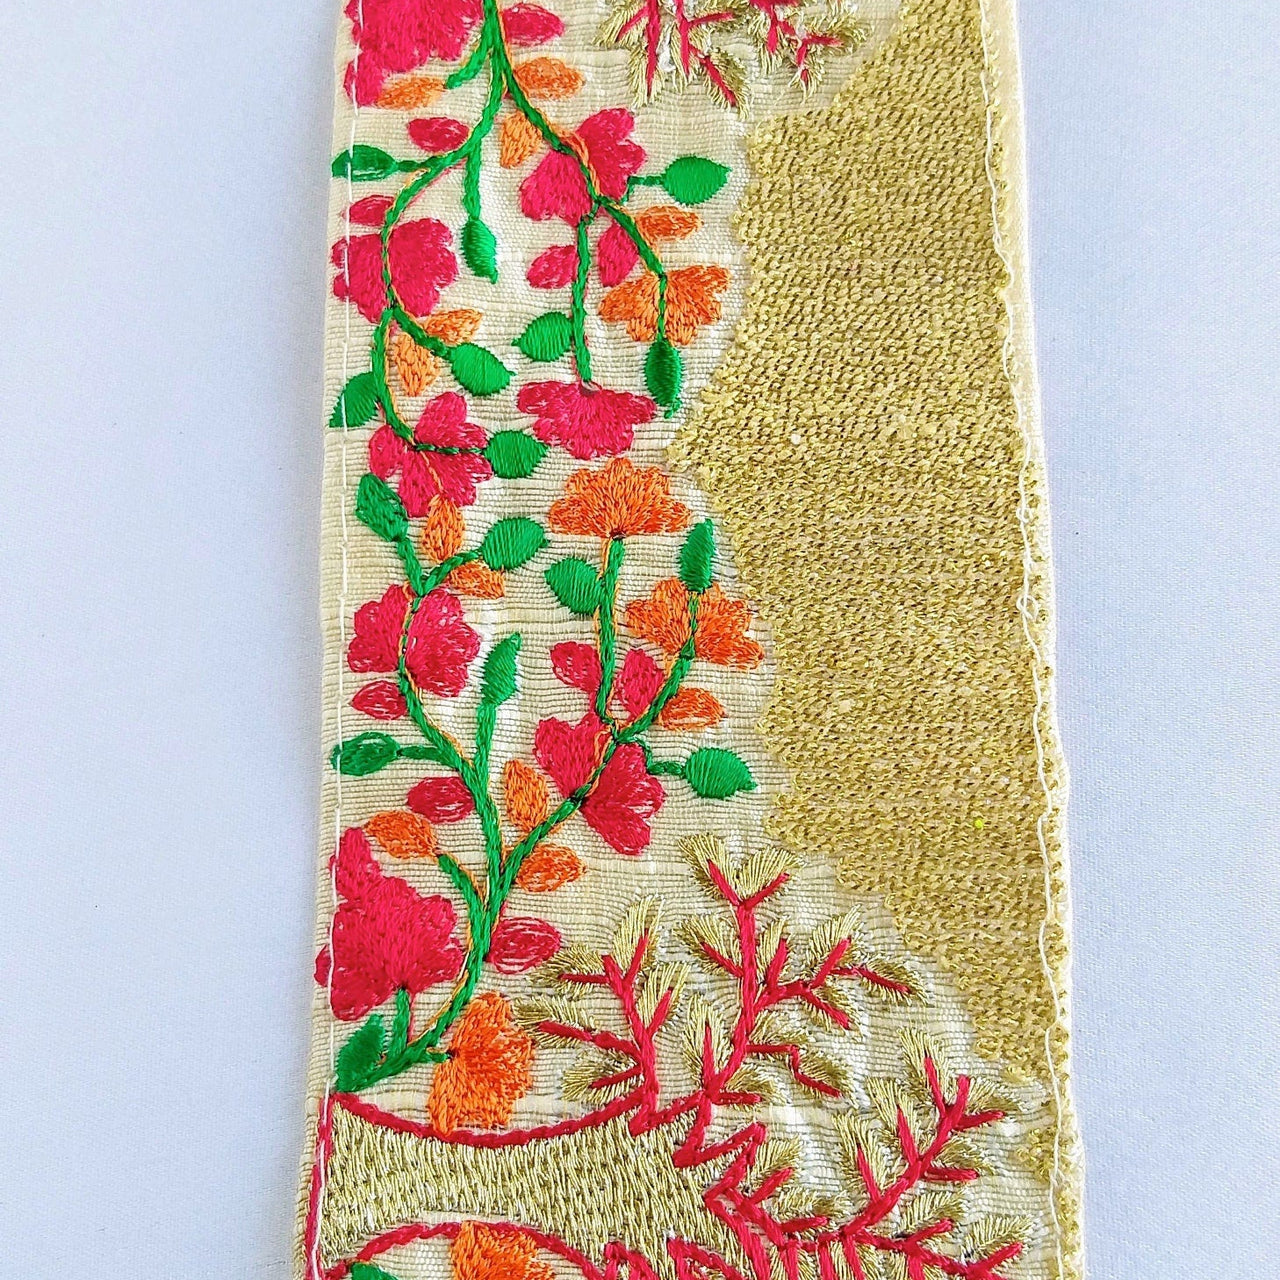 Beige Fabric Trim With Intricate Floral And Trees Embroidery In Gold, Red, Green And Orange Thread